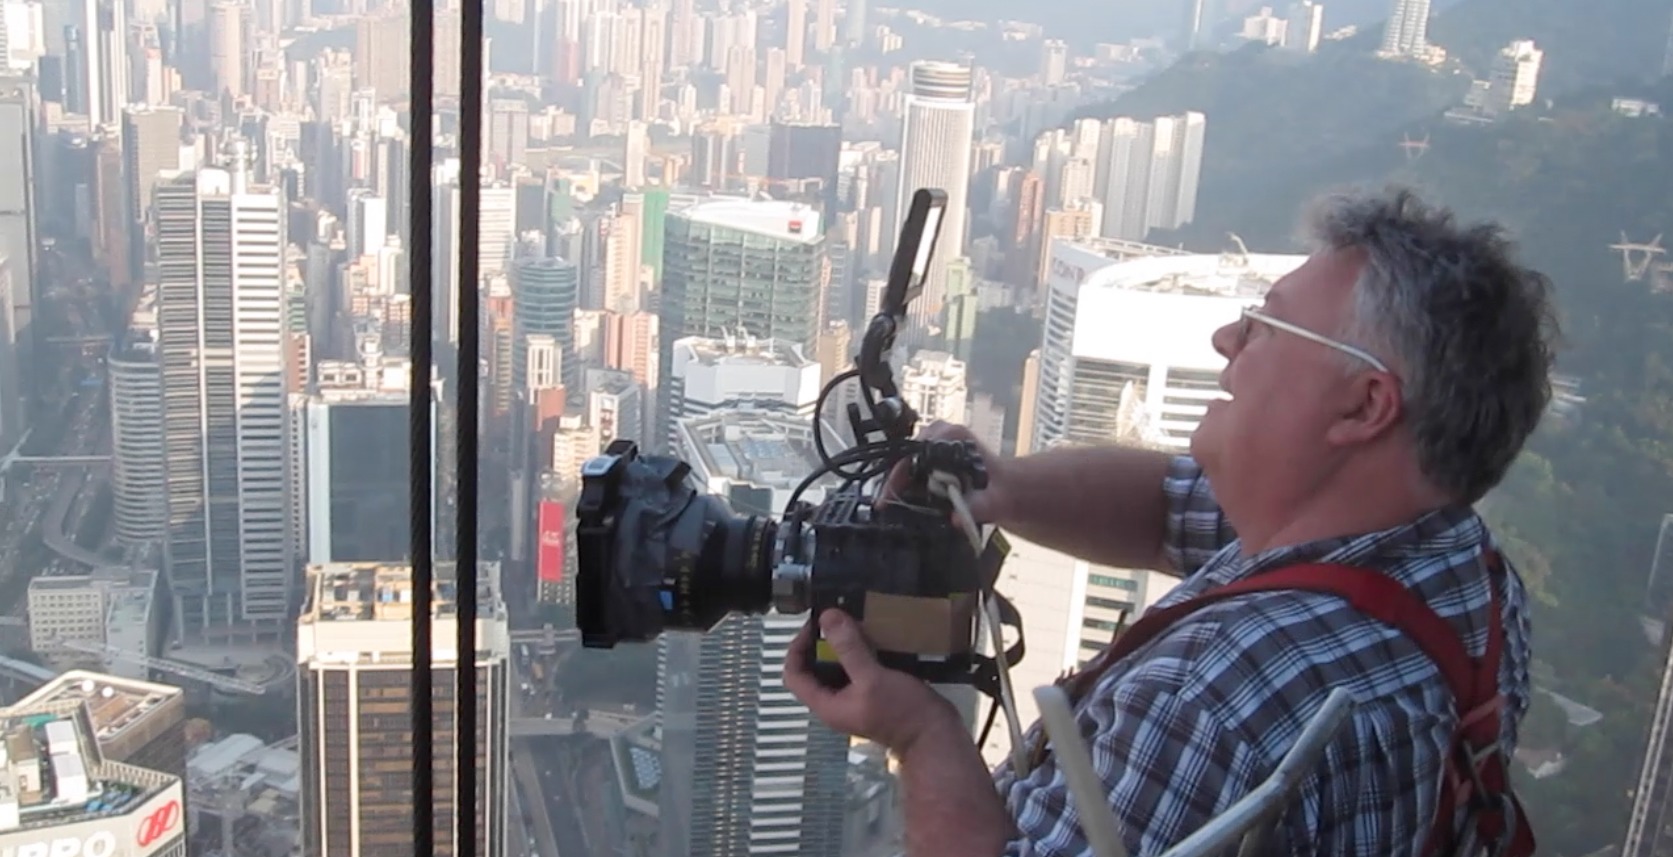 shooting flying robots from Bank of China's window cleaning bucket, 69 floors up. RED Epic, 25mm Anamorphic lens